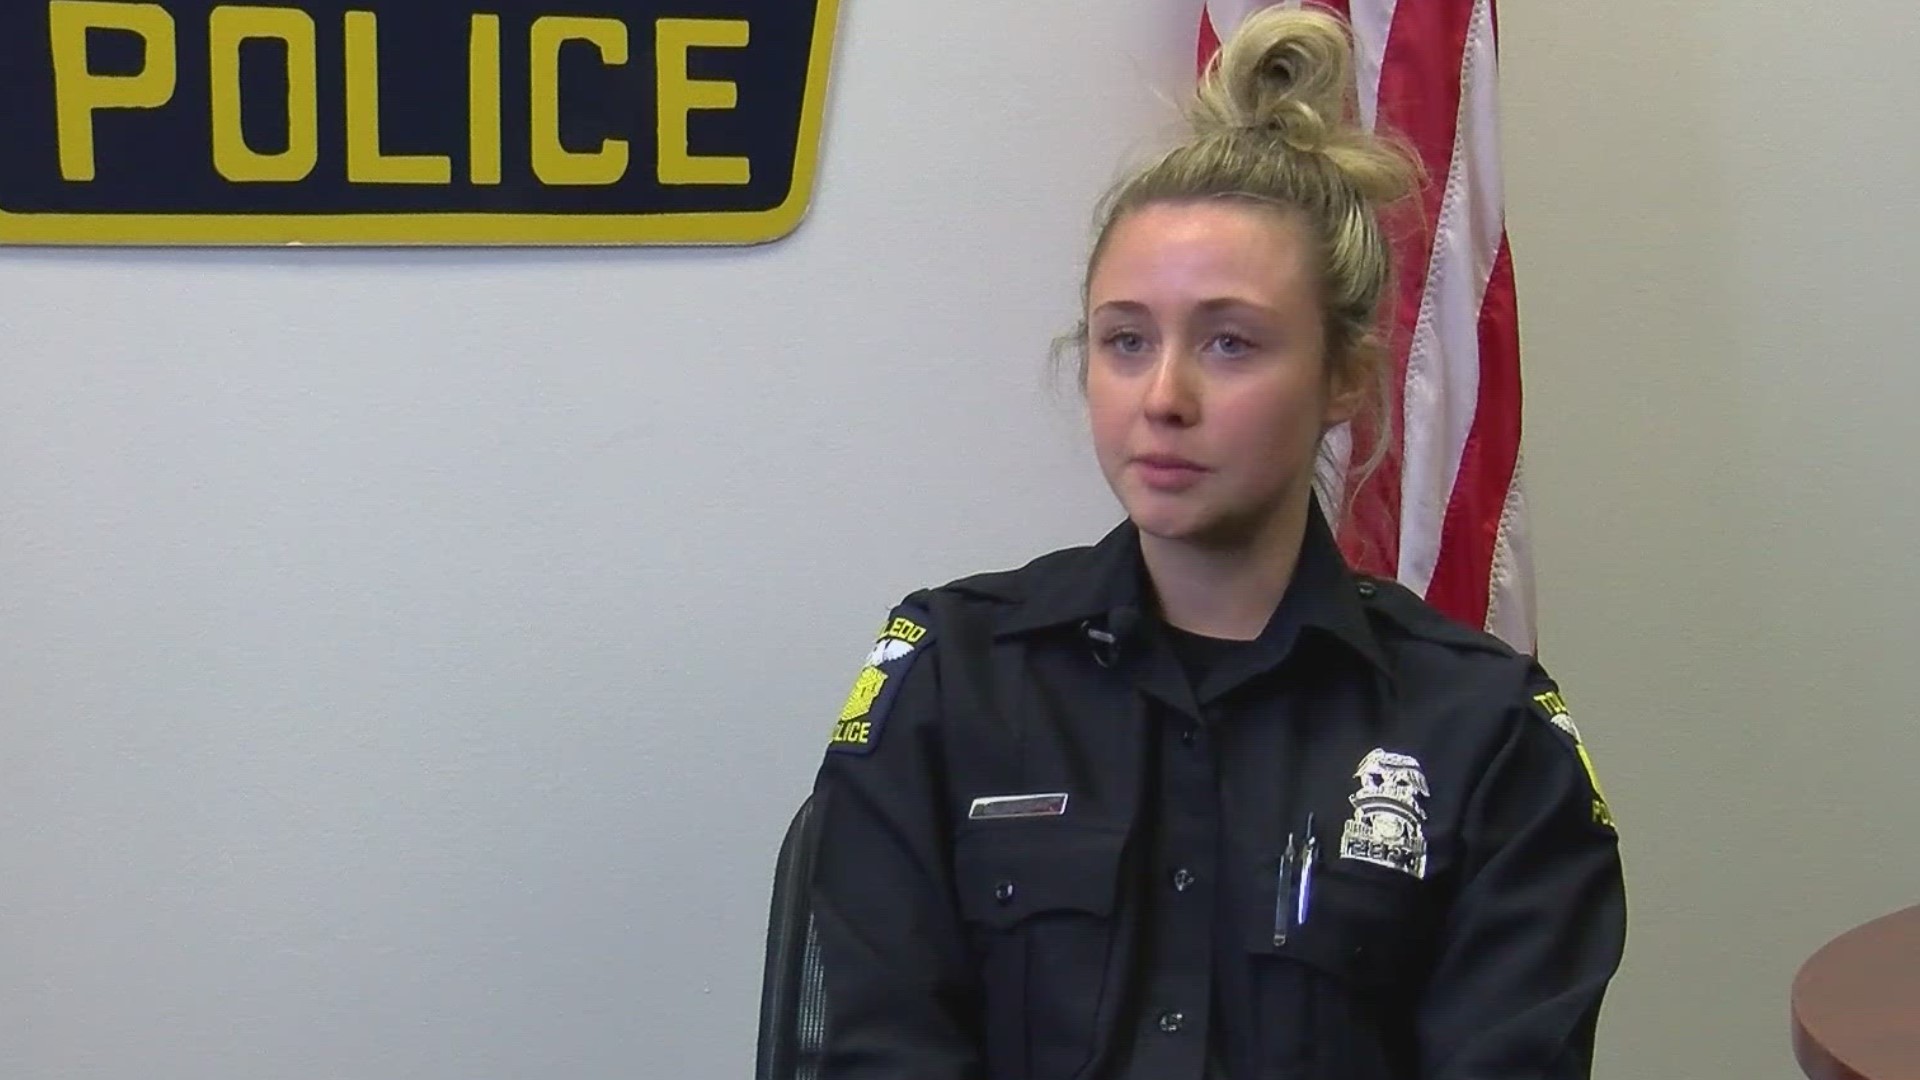 Officer Morgan Balboa says she always knew she wanted to help people, so she interned for the Toledo police to find her way. It led her to a job with TPD.